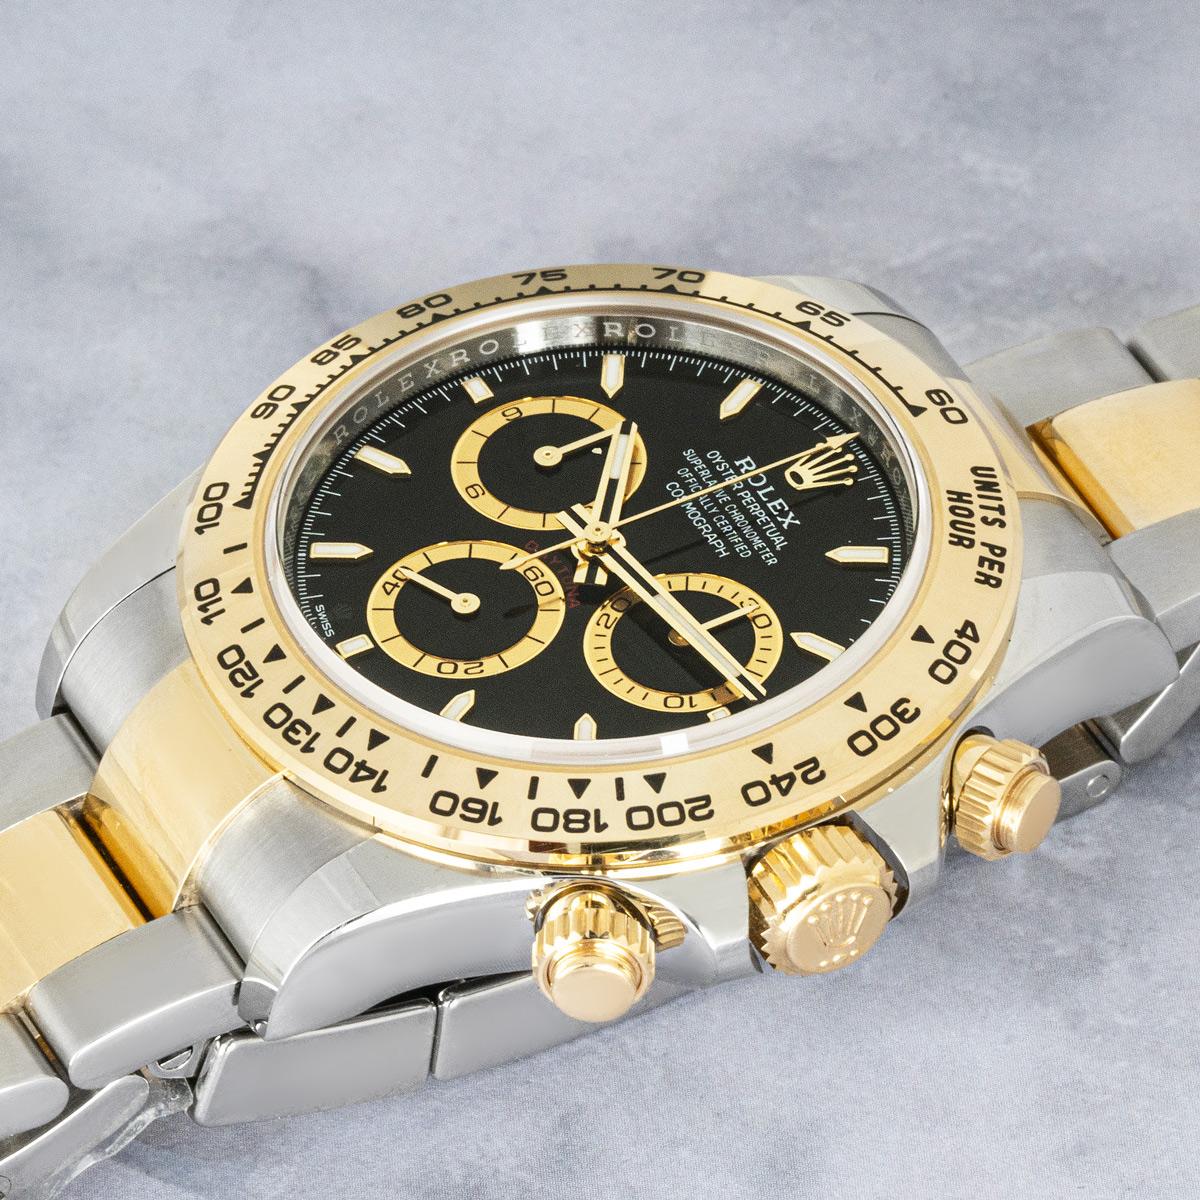 An unworn Daytona from Rolex in Oystersteel and yellow gold. Features a black dial with applied hour markers. With an engraved tachymetric scale, three counters and pushers, the Daytona was designed to be the ultimate timing tool for endurance